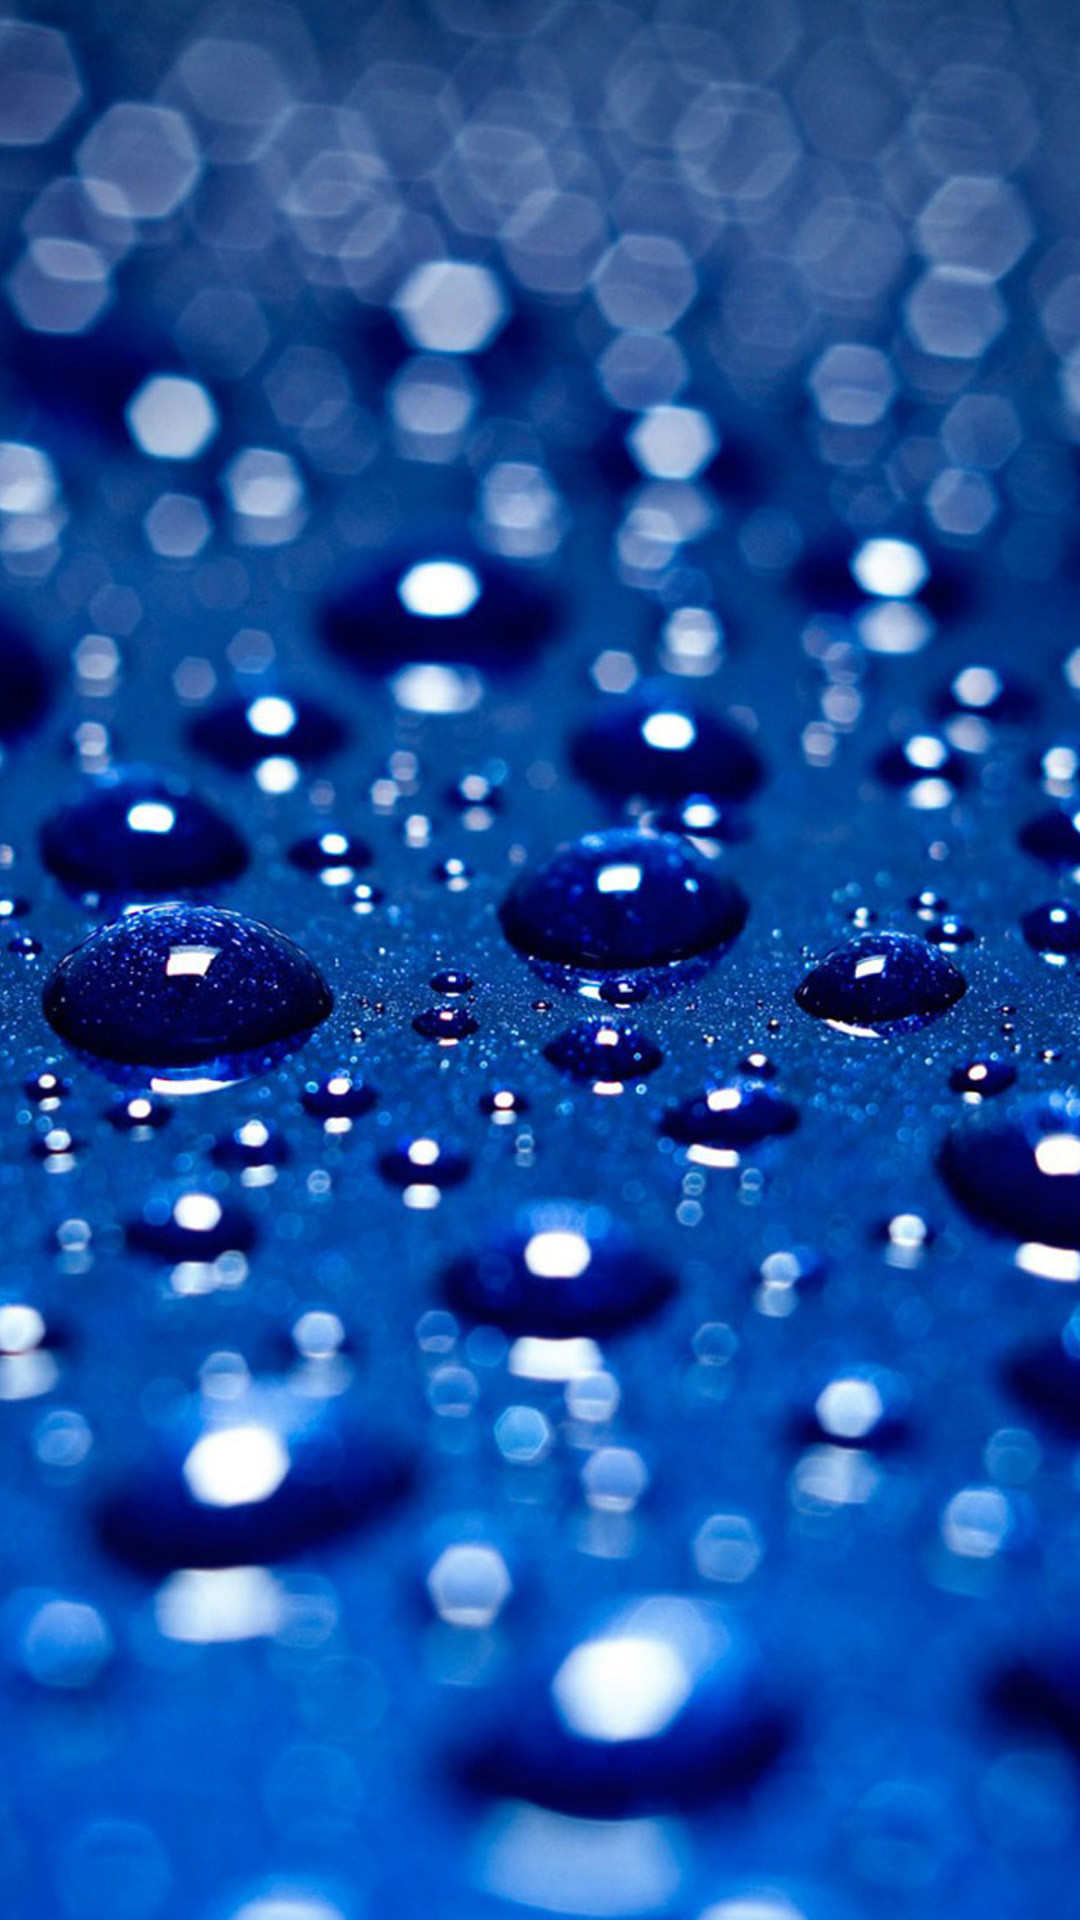 Blue water drops 04 Samsung Galaxy Note 3 Wallpapers